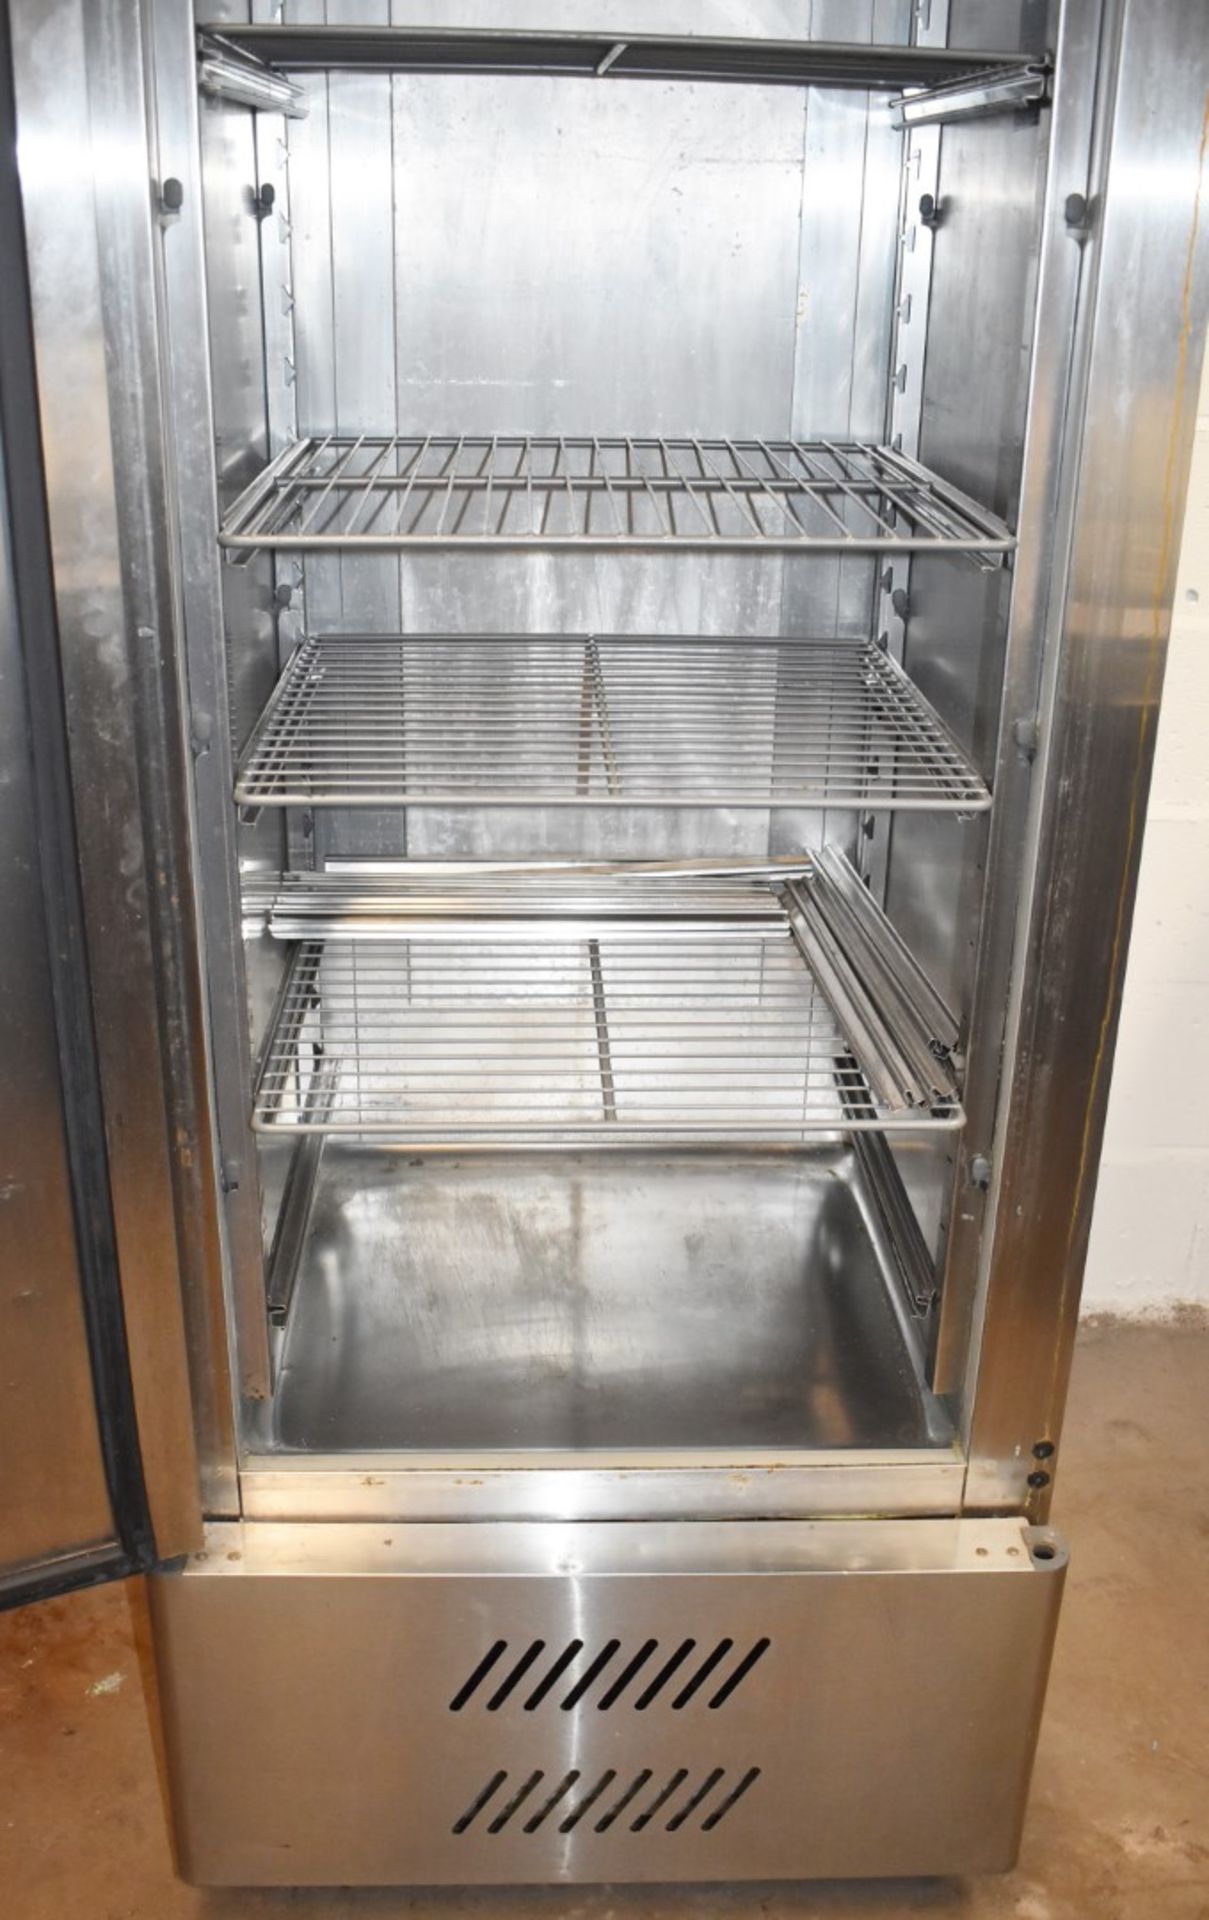 1 x Williams HZ16 Upright Single Door Refrigerator With Stainless Steel Finish - Ref: GCA139 WH5 - - Image 3 of 12